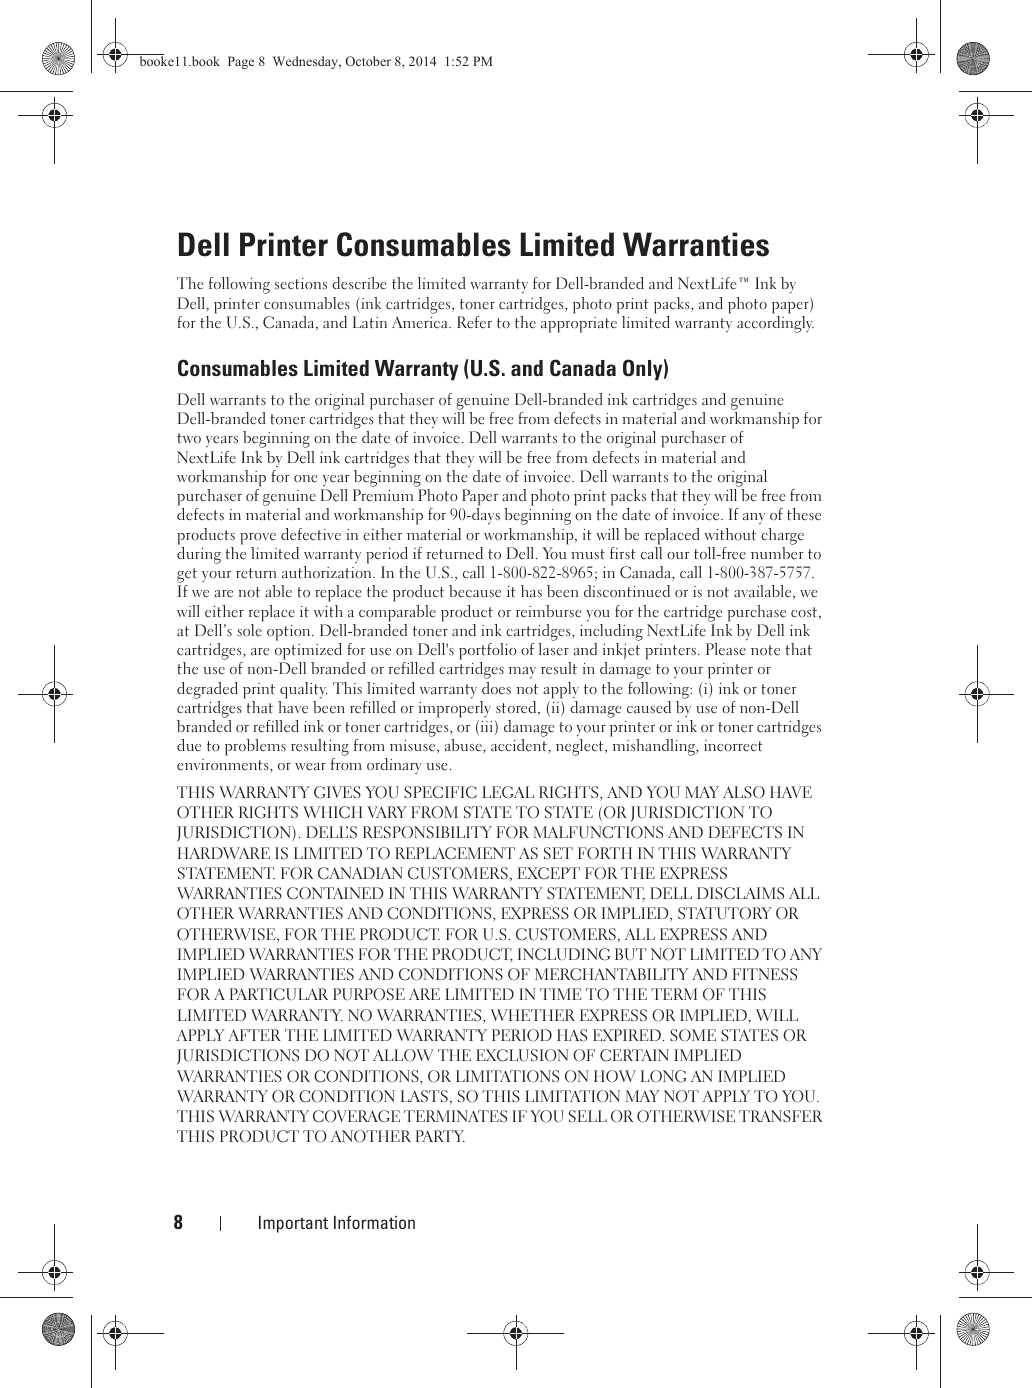 8Important InformationDell Printer Consumables Limited WarrantiesThe following sections describe the limited warranty for Dell-branded and NextLife™ Ink by Dell, printer consumables (ink cartridges, toner cartridges, photo print packs, and photo paper) for the U.S., Canada, and Latin America. Refer to the appropriate limited warranty accordingly.Consumables Limited Warranty (U.S. and Canada Only)Dell warrants to the original purchaser of genuine Dell-branded ink cartridges and genuineDell-branded toner cartridges that they will be free from defects in material and workmanship for two years beginning on the date of invoice. Dell warrants to the original purchaser of NextLife Ink by Dell ink cartridges that they will be free from defects in material and workmanship for one year beginning on the date of invoice. Dell warrants to the original purchaser of genuine Dell Premium Photo Paper and photo print packs that they will be free from defects in material and workmanship for 90-days beginning on the date of invoice. If any of these products prove defective in either material or workmanship, it will be replaced without charge during the limited warranty period if returned to Dell. You must first call our toll-free number to get your return authorization. In the U.S., call 1-800-822-8965; in Canada, call 1-800-387-5757. If we are not able to replace the product because it has been discontinued or is not available, we will either replace it with a comparable product or reimburse you for the cartridge purchase cost, at Dell’s sole option. Dell-branded toner and ink cartridges, including NextLife Ink by Dell ink cartridges, are optimized for use on Dell&apos;s portfolio of laser and inkjet printers. Please note that the use of non-Dell branded or refilled cartridges may result in damage to your printer or degraded print quality. This limited warranty does not apply to the following: (i) ink or toner cartridges that have been refilled or improperly stored, (ii) damage caused by use of non-Dell branded or refilled ink or toner cartridges, or (iii) damage to your printer or ink or toner cartridges due to problems resulting from misuse, abuse, accident, neglect, mishandling, incorrect environments, or wear from ordinary use.THIS WARRANTY GIVES YOU SPECIFIC LEGAL RIGHTS, AND YOU MAY ALSO HAVE OTHER RIGHTS WHICH VARY FROM STATE TO STATE (OR JURISDICTION TO JURISDICTION). DELL’S RESPONSIBILITY FOR MALFUNCTIONS AND DEFECTS IN HARDWARE IS LIMITED TO REPLACEMENT AS SET FORTH IN THIS WARRANTY STATEMENT. FOR CANADIAN CUSTOMERS, EXCEPT FOR THE EXPRESS WARRANTIES CONTAINED IN THIS WARRANTY STATEMENT, DELL DISCLAIMS ALL OTHER WARRANTIES AND CONDITIONS, EXPRESS OR IMPLIED, STATUTORY OR OTHERWISE, FOR THE PRODUCT. FOR U.S. CUSTOMERS, ALL EXPRESS AND IMPLIED WARRANTIES FOR THE PRODUCT, INCLUDING BUT NOT LIMITED TO ANY IMPLIED WARRANTIES AND CONDITIONS OF MERCHANTABILITY AND FITNESS FOR A PARTICULAR PURPOSE ARE LIMITED IN TIME TO THE TERM OF THIS LIMITED WARRANTY. NO WARRANTIES, WHETHER EXPRESS OR IMPLIED, WILL APPLY AFTER THE LIMITED WARRANTY PERIOD HAS EXPIRED. SOME STATES OR JURISDICTIONS DO NOT ALLOW THE EXCLUSION OF CERTAIN IMPLIED WARRANTIES OR CONDITIONS, OR LIMITATIONS ON HOW LONG AN IMPLIED WARRANTY OR CONDITION LASTS, SO THIS LIMITATION MAY NOT APPLY TO YOU. THIS WARRANTY COVERAGE TERMINATES IF YOU SELL OR OTHERWISE TRANSFER THIS PRODUCT TO ANOTHER PARTY.booke11.book  Page 8  Wednesday, October 8, 2014  1:52 PM